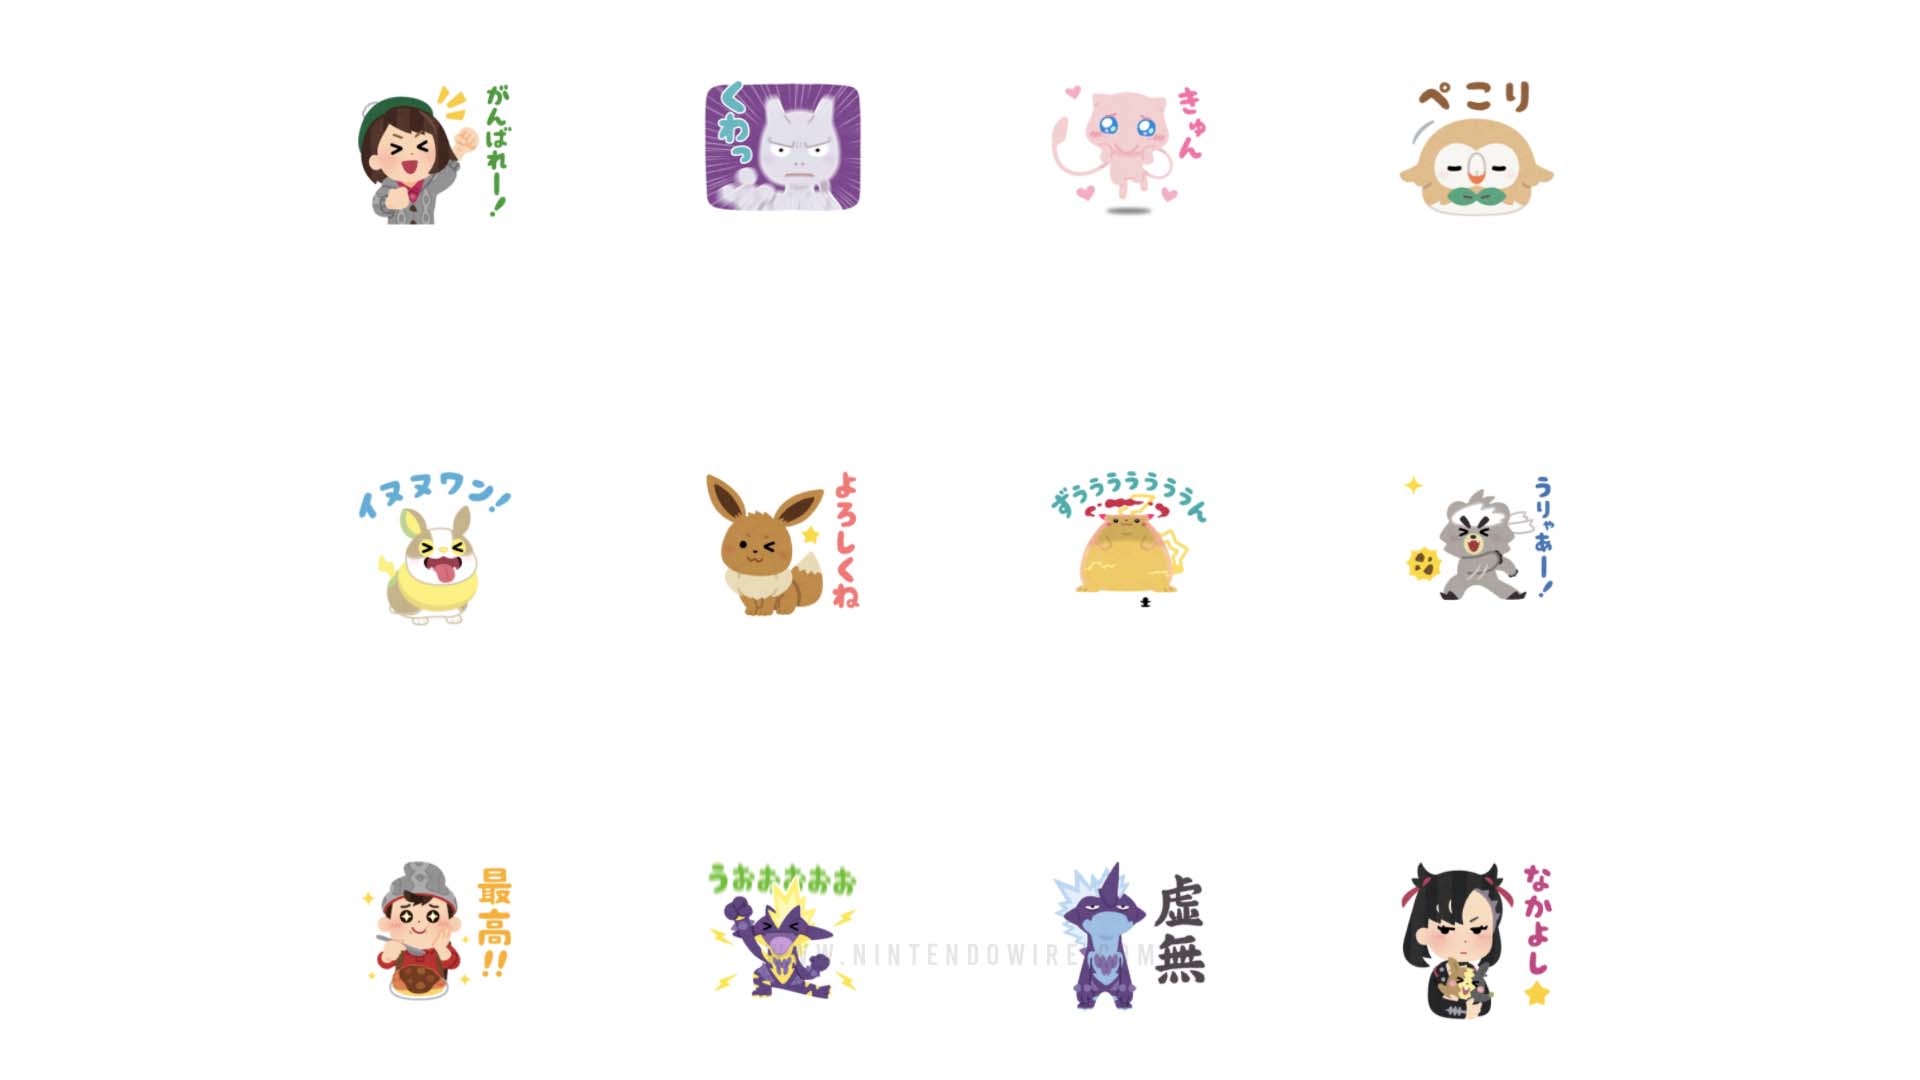 New Pok mon stickers  for LINE  app now available in Japan 